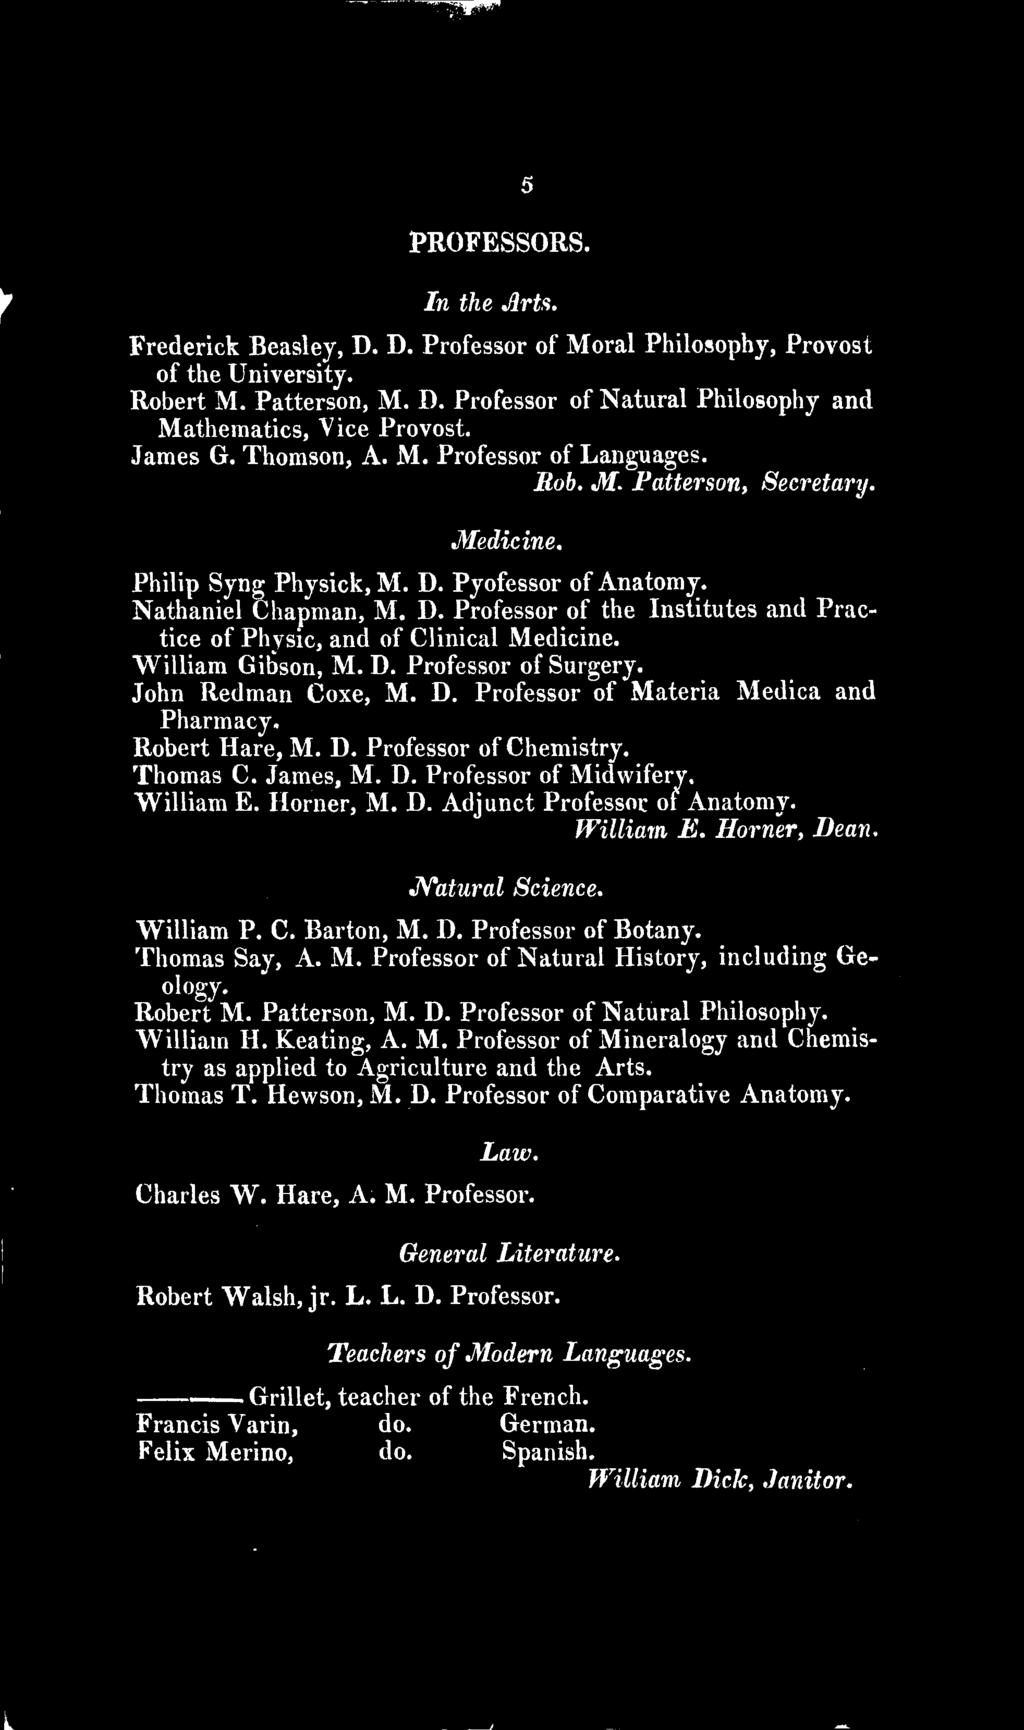 Robert M. Patterson, M. D. Professor of Natural Philosophy. William H. Keating, A. M. Professor of Mineralogy and Chemistry as applied to Agriculture and the Arts. Thomas T. Hewson, M. D. Professor of Comparative Anatomy.